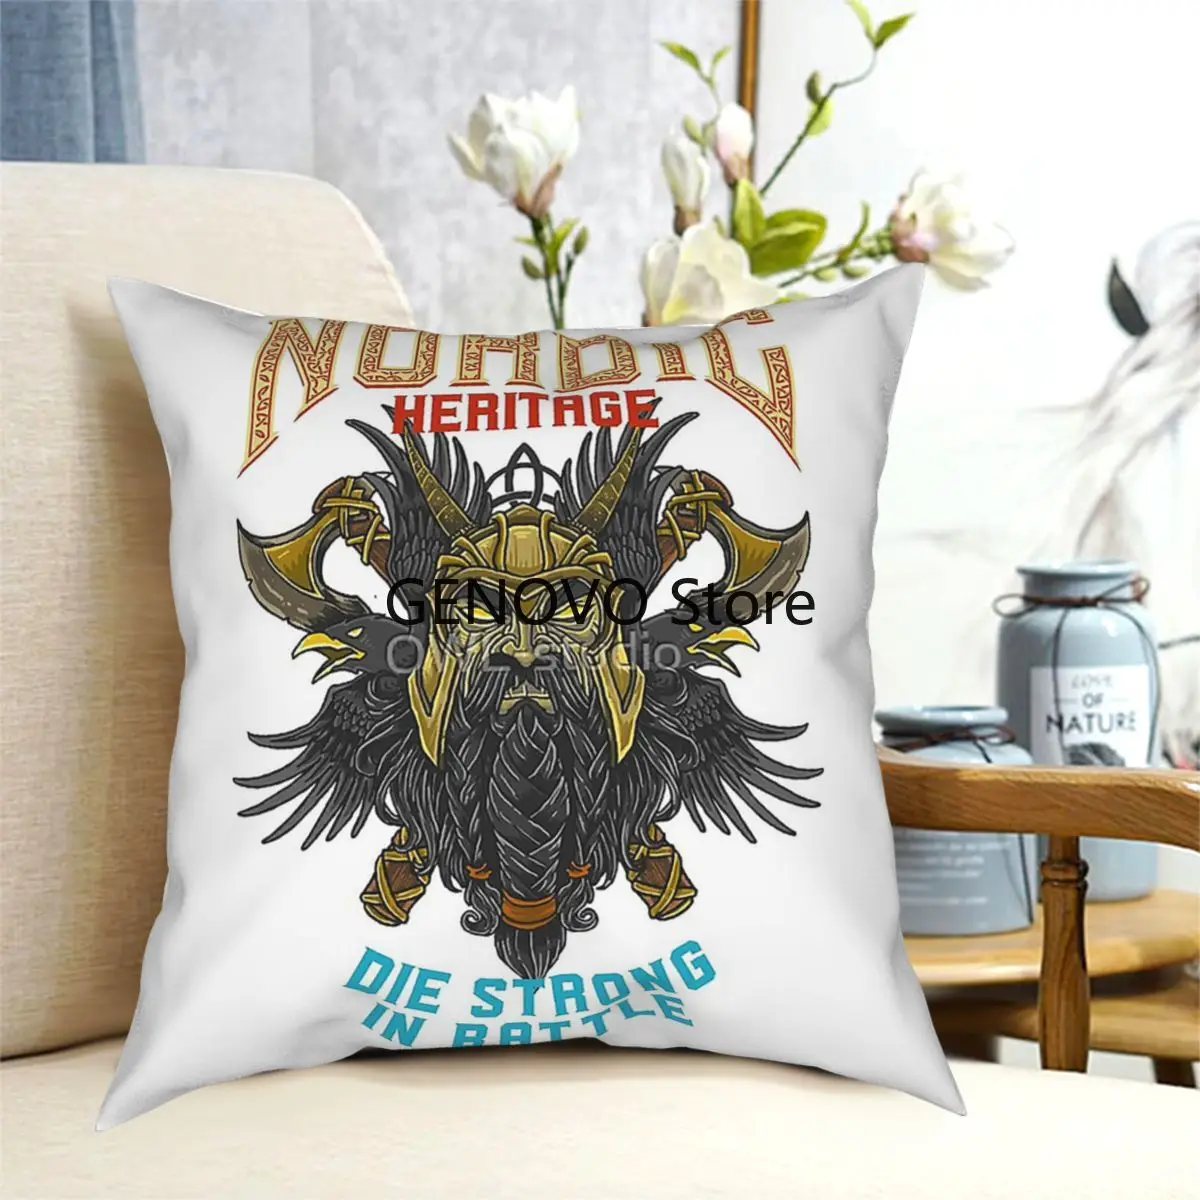 

Nordic Heritage Viking Special Gift Assassins Creed Valhalla,Viking,Vikings Square Pillow Case Throw Pillow Novelty Pillowcase